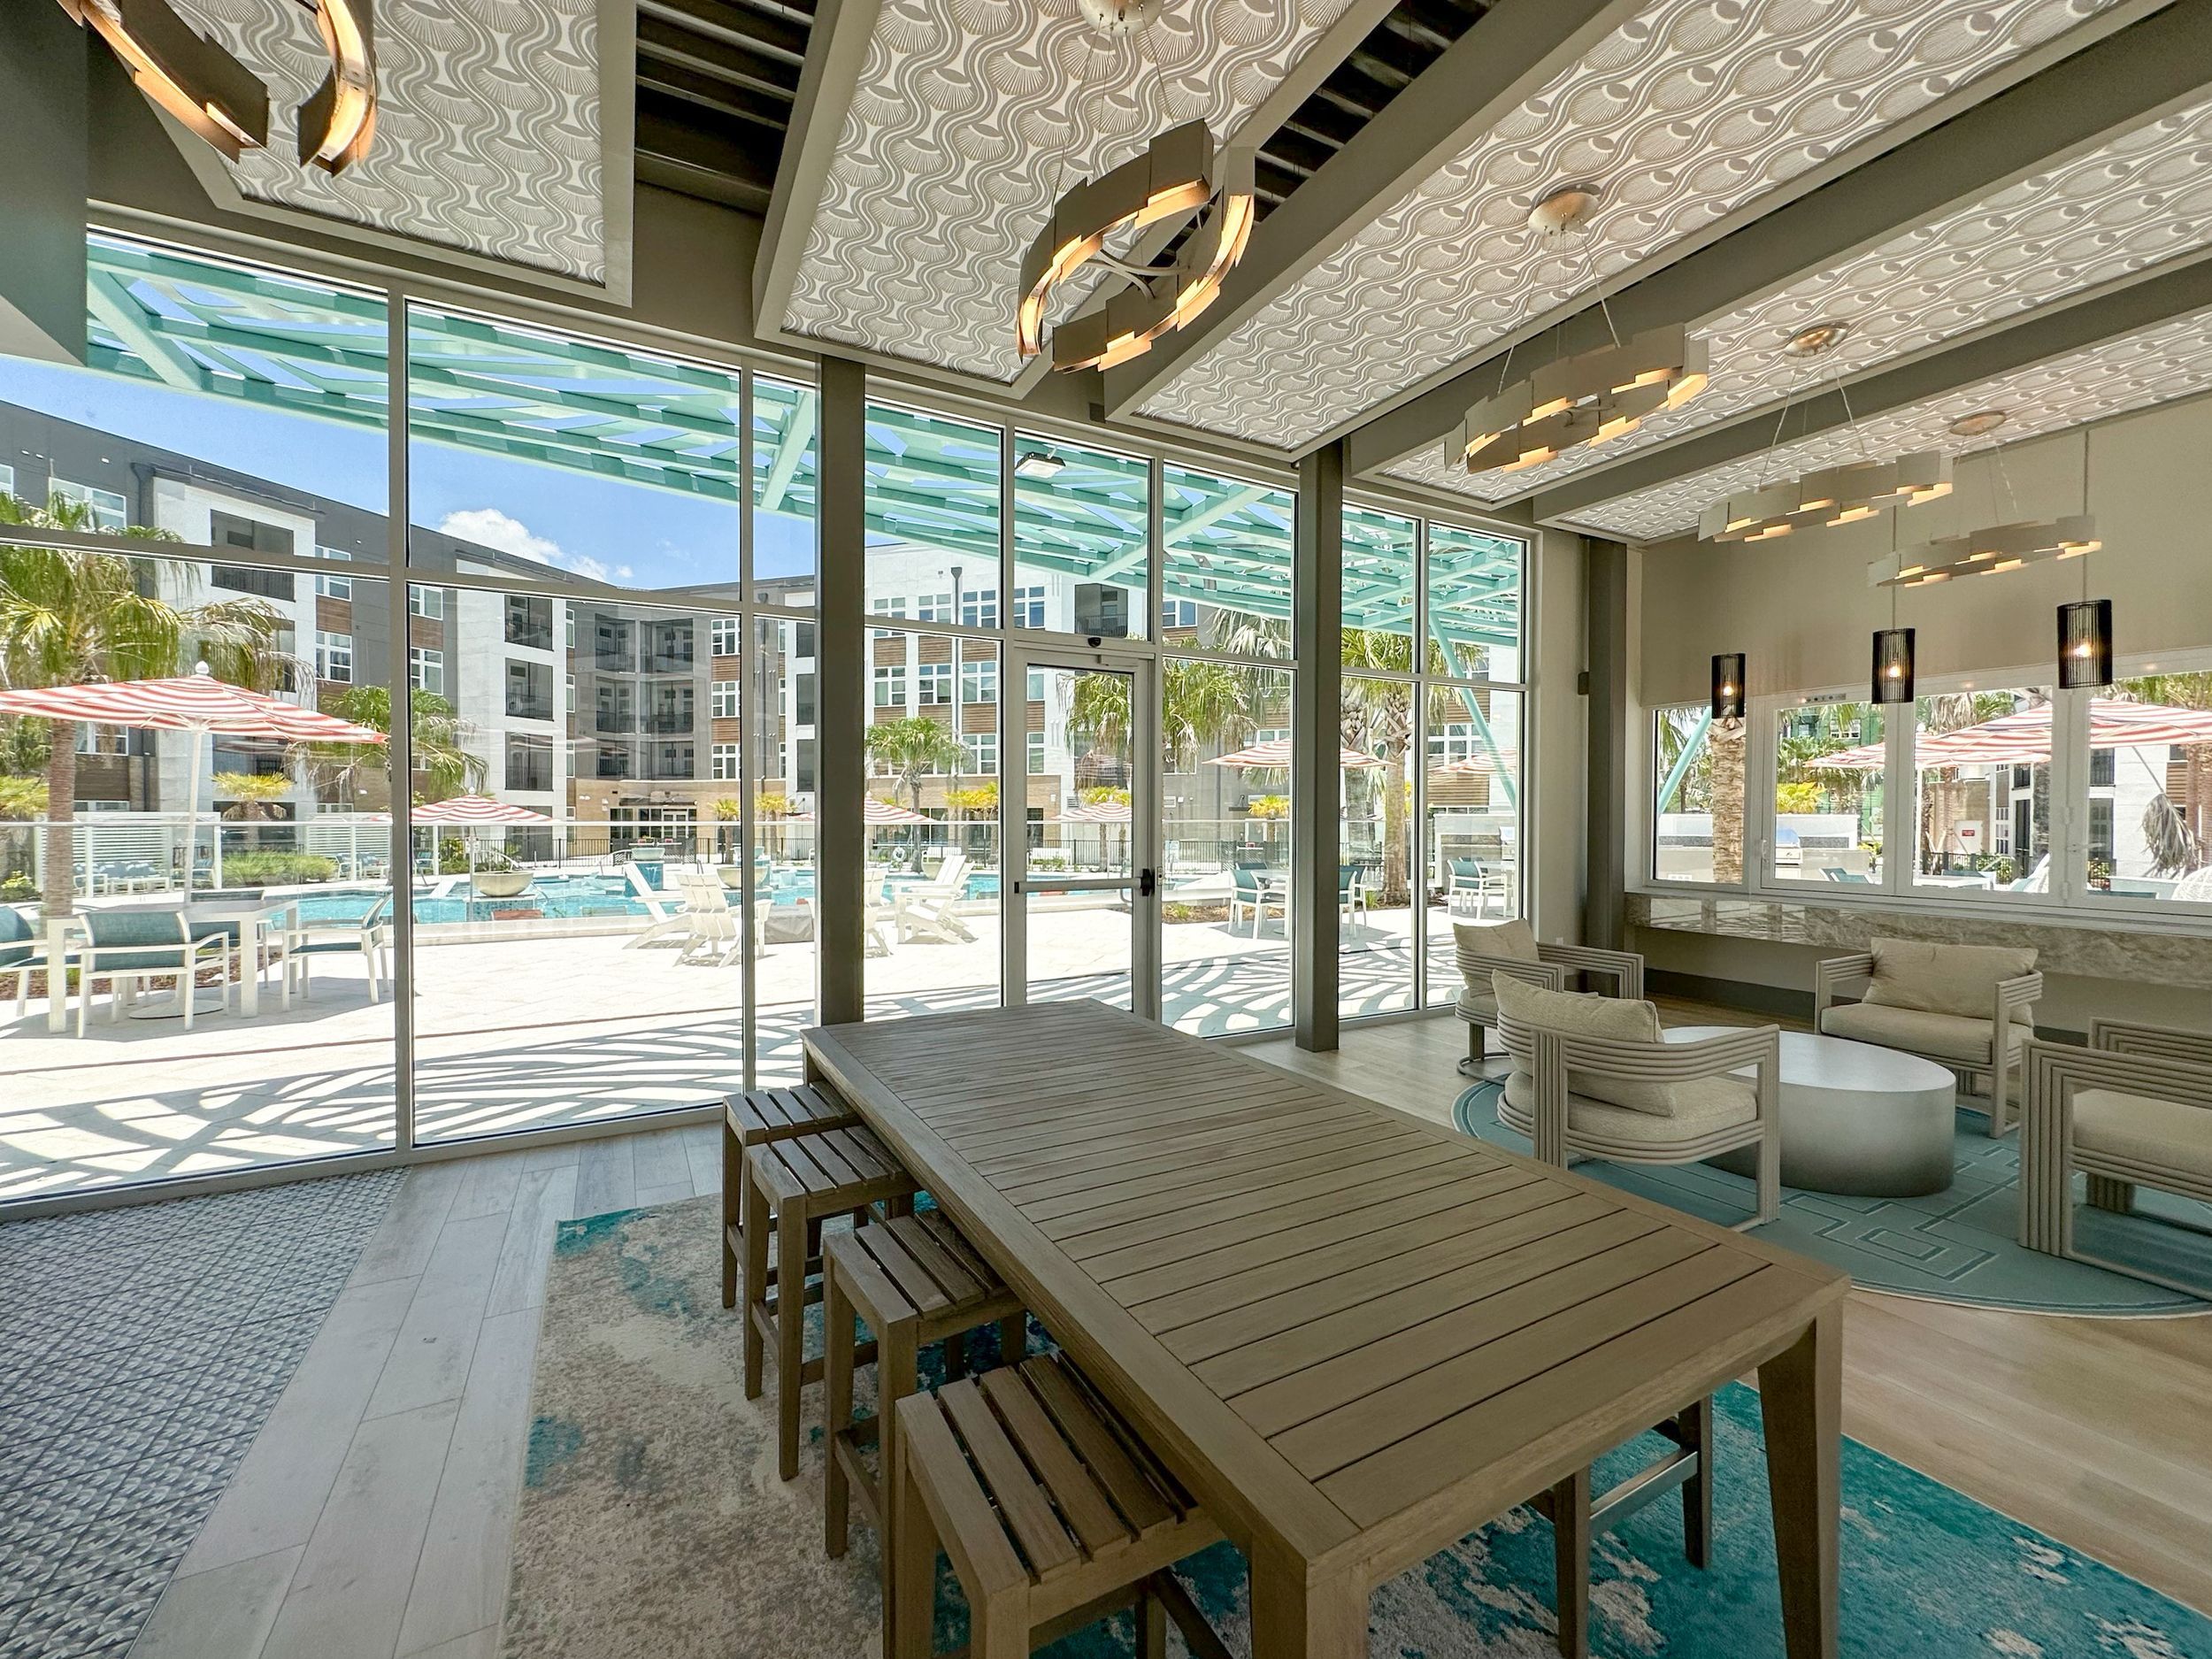 Modern wood table with designer lighting and floor-to-ceiling windows facing the pool